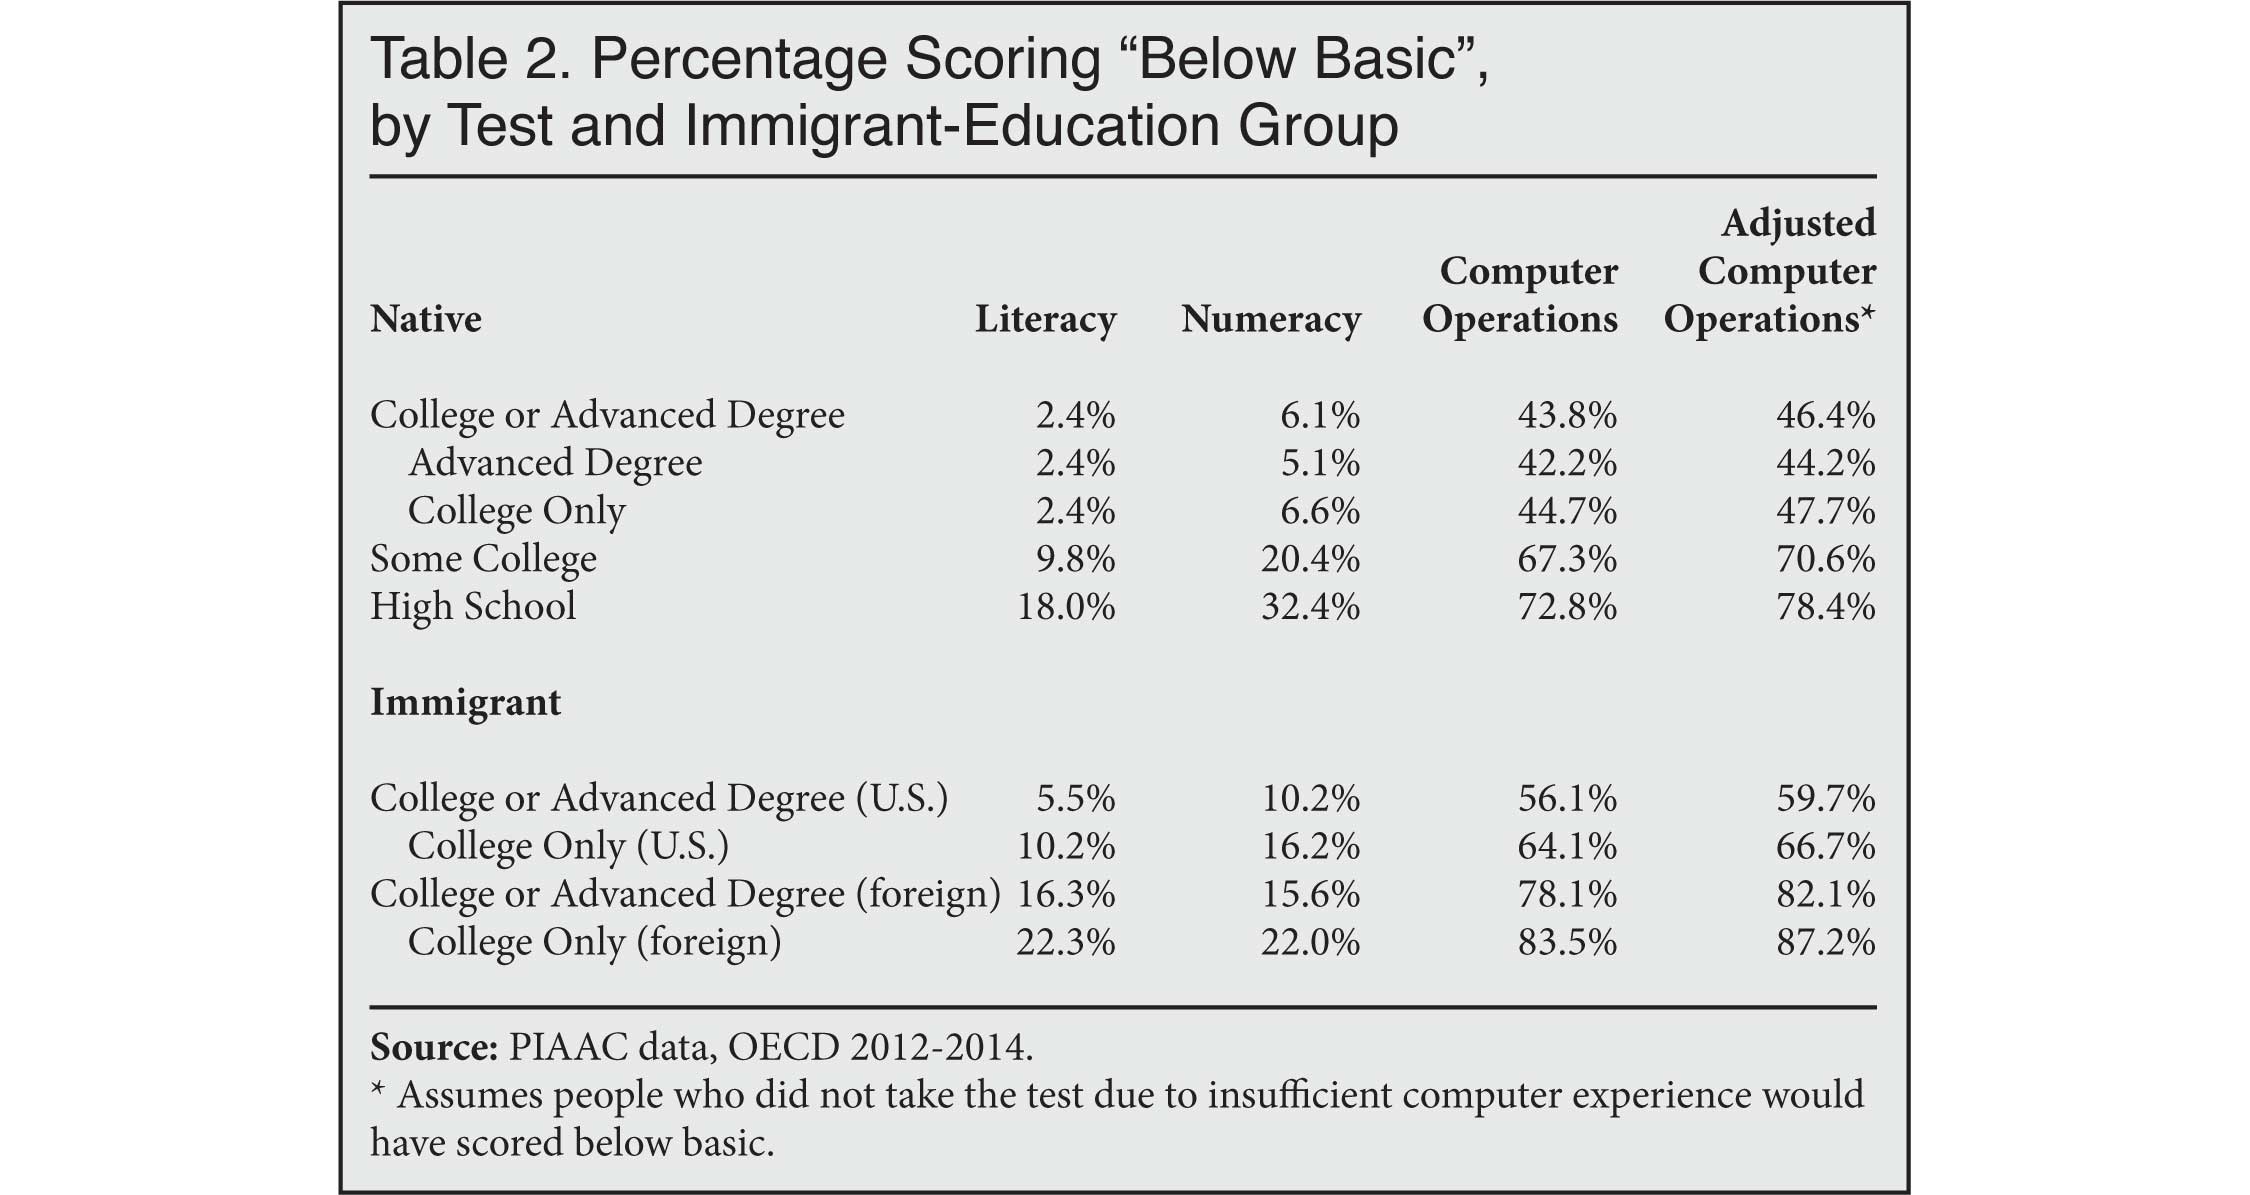 Table: Percentage Scoring "Below Basic" by Test and Immigrant Group